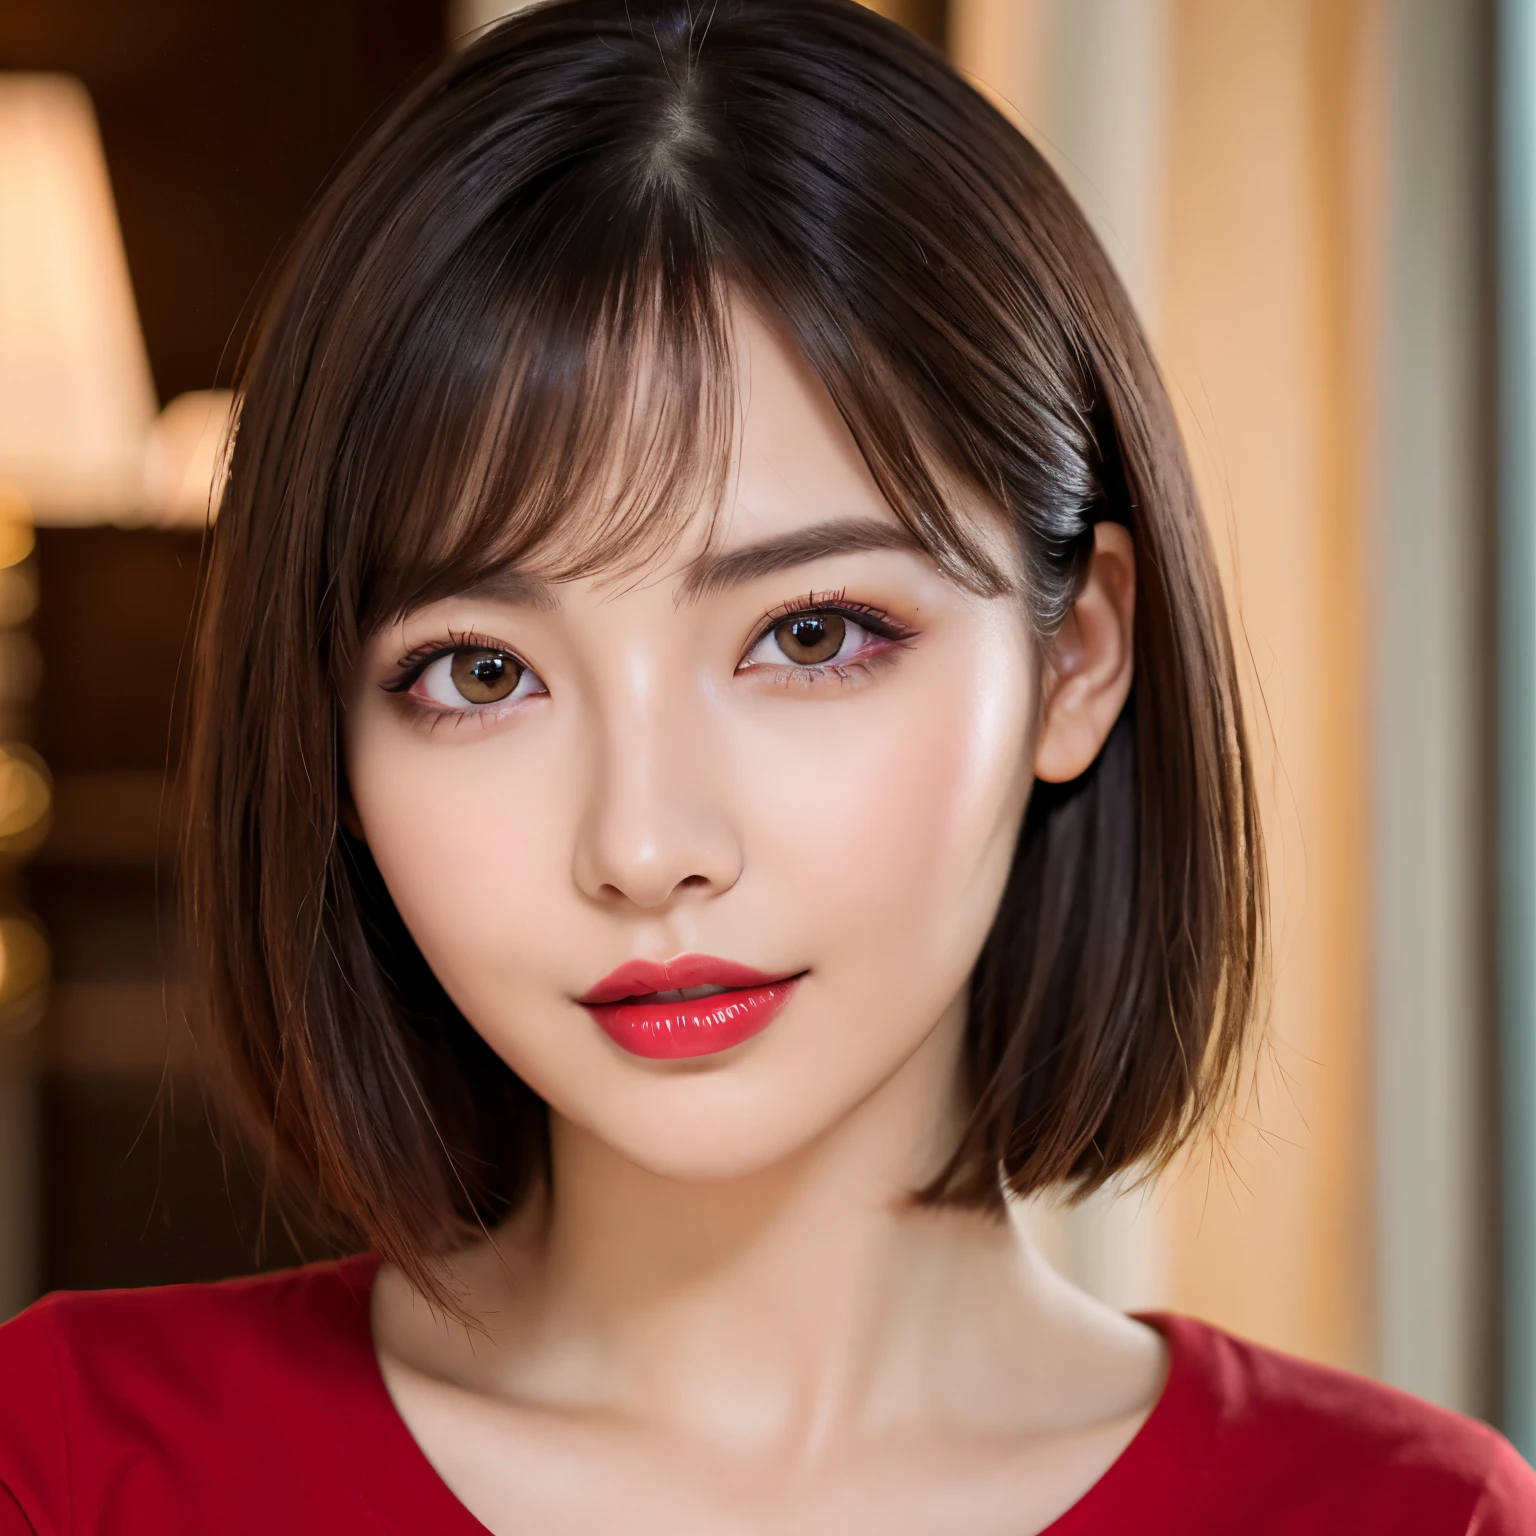 (highest quality、table top、8k、best image quality、Award-winning work)、(one young girl, 14 years old:1.3)、(Perfect V-neck red long knit sweater:1.3)、(red eyeshadow:1.2)、perfect makeup、long eyelashes、Super high-definition sparkling eyes、ultra high definition hair、ultra high resolution glossy lips、Super high resolution perfect teeth、Super high resolution cute face、brown hair、(short bob hair:1.1)、look at me and smile、(closed lips:1.1)、[clavicle]、accurate anatomy、(close up of face:1.5)、(Luxury love hotel:1.1)、(The most moody warm lighting:1.3)、blurred background、With bangs、Super high-resolution glossy and moisturized face、Super high-resolution glowing skin、most detailed face、Ultra high resolution detailed faces、ultra high resolution hair、Super high resolution sparkling eyes、Beautiful face drawn in every detail、Super high resolution glossy red lips